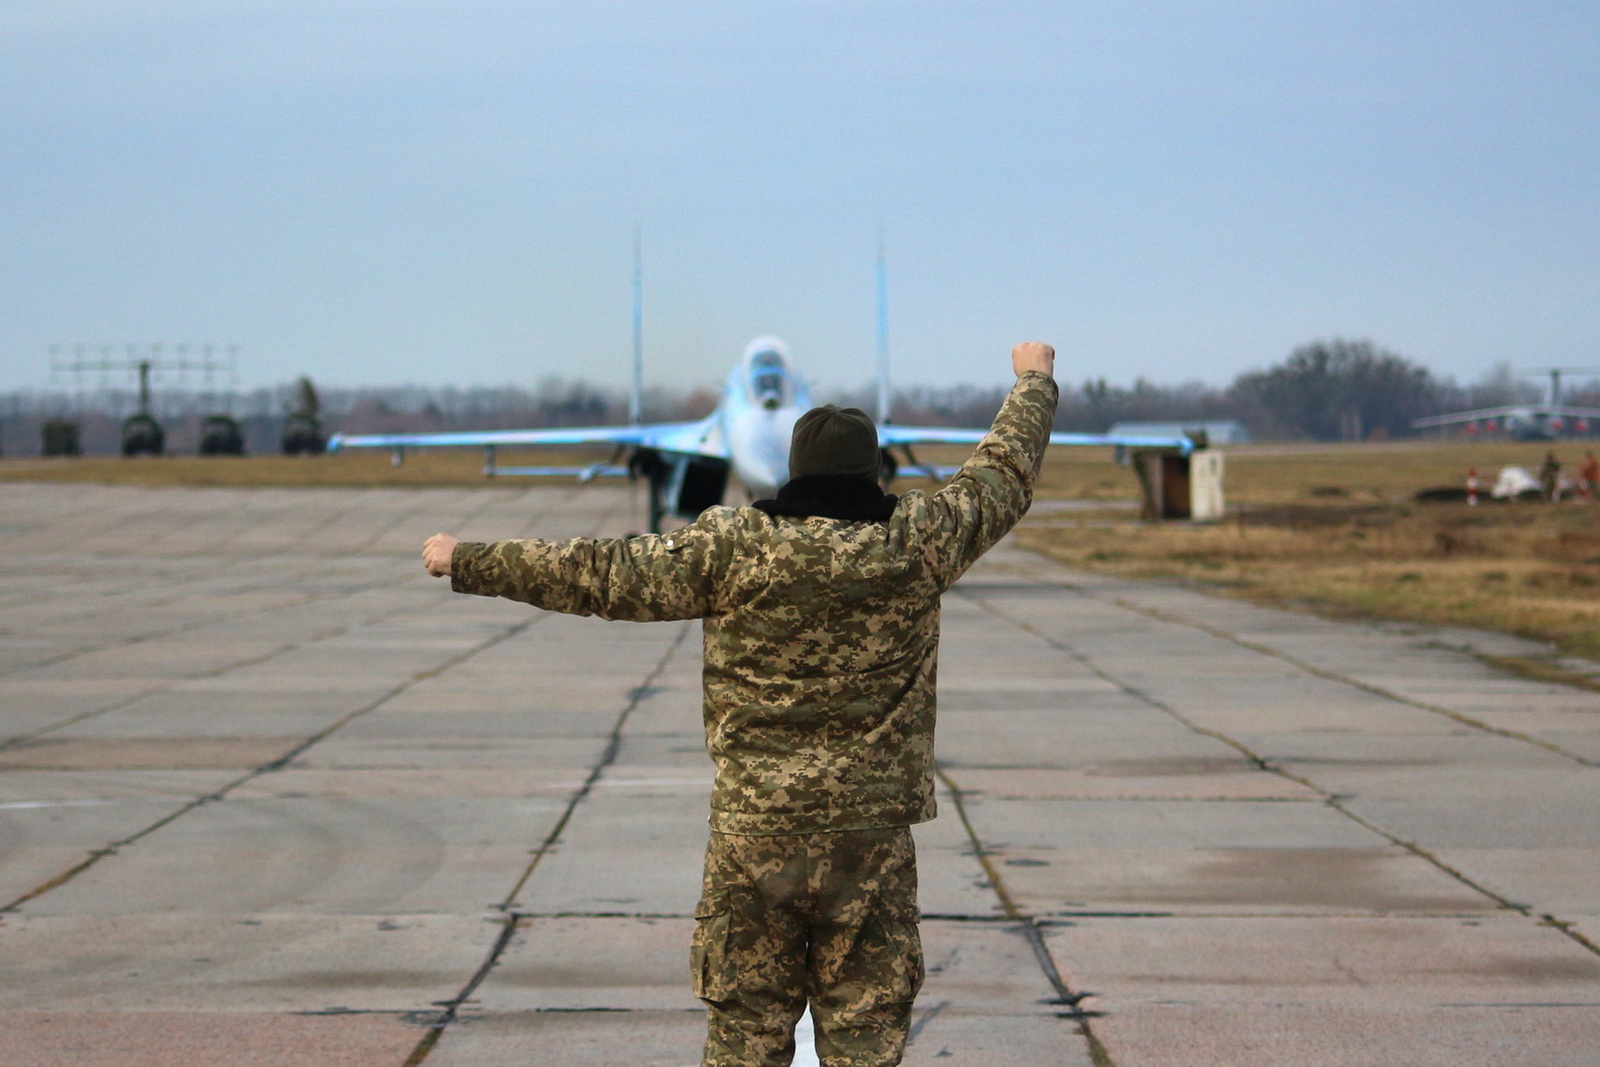 A Ukrainian military officer handles the runway strip traffic at an Air Force base on Jan 11, 2018.